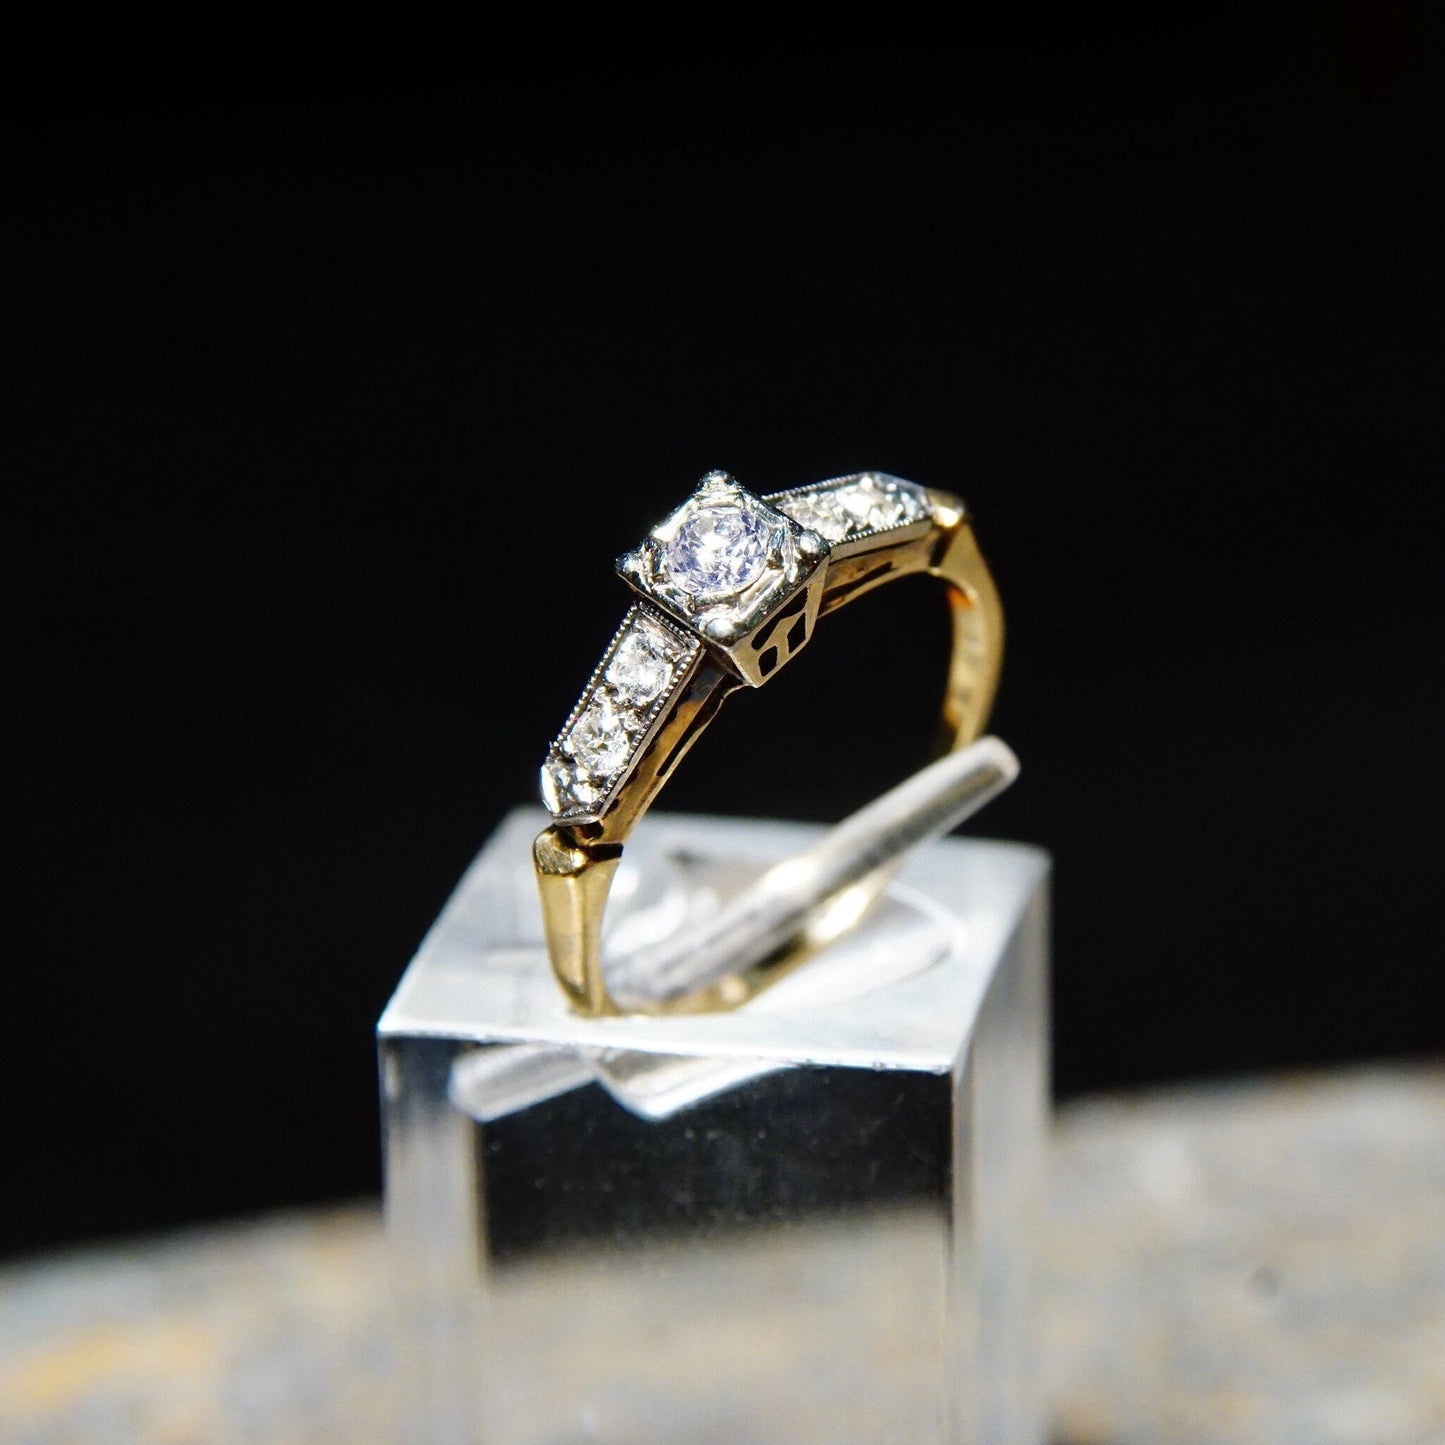 Vintage 14K yellow gold and 18K white gold diamond engagement ring with .14 carat old European cut center stone on display stand, ring size 6 1/4 US.